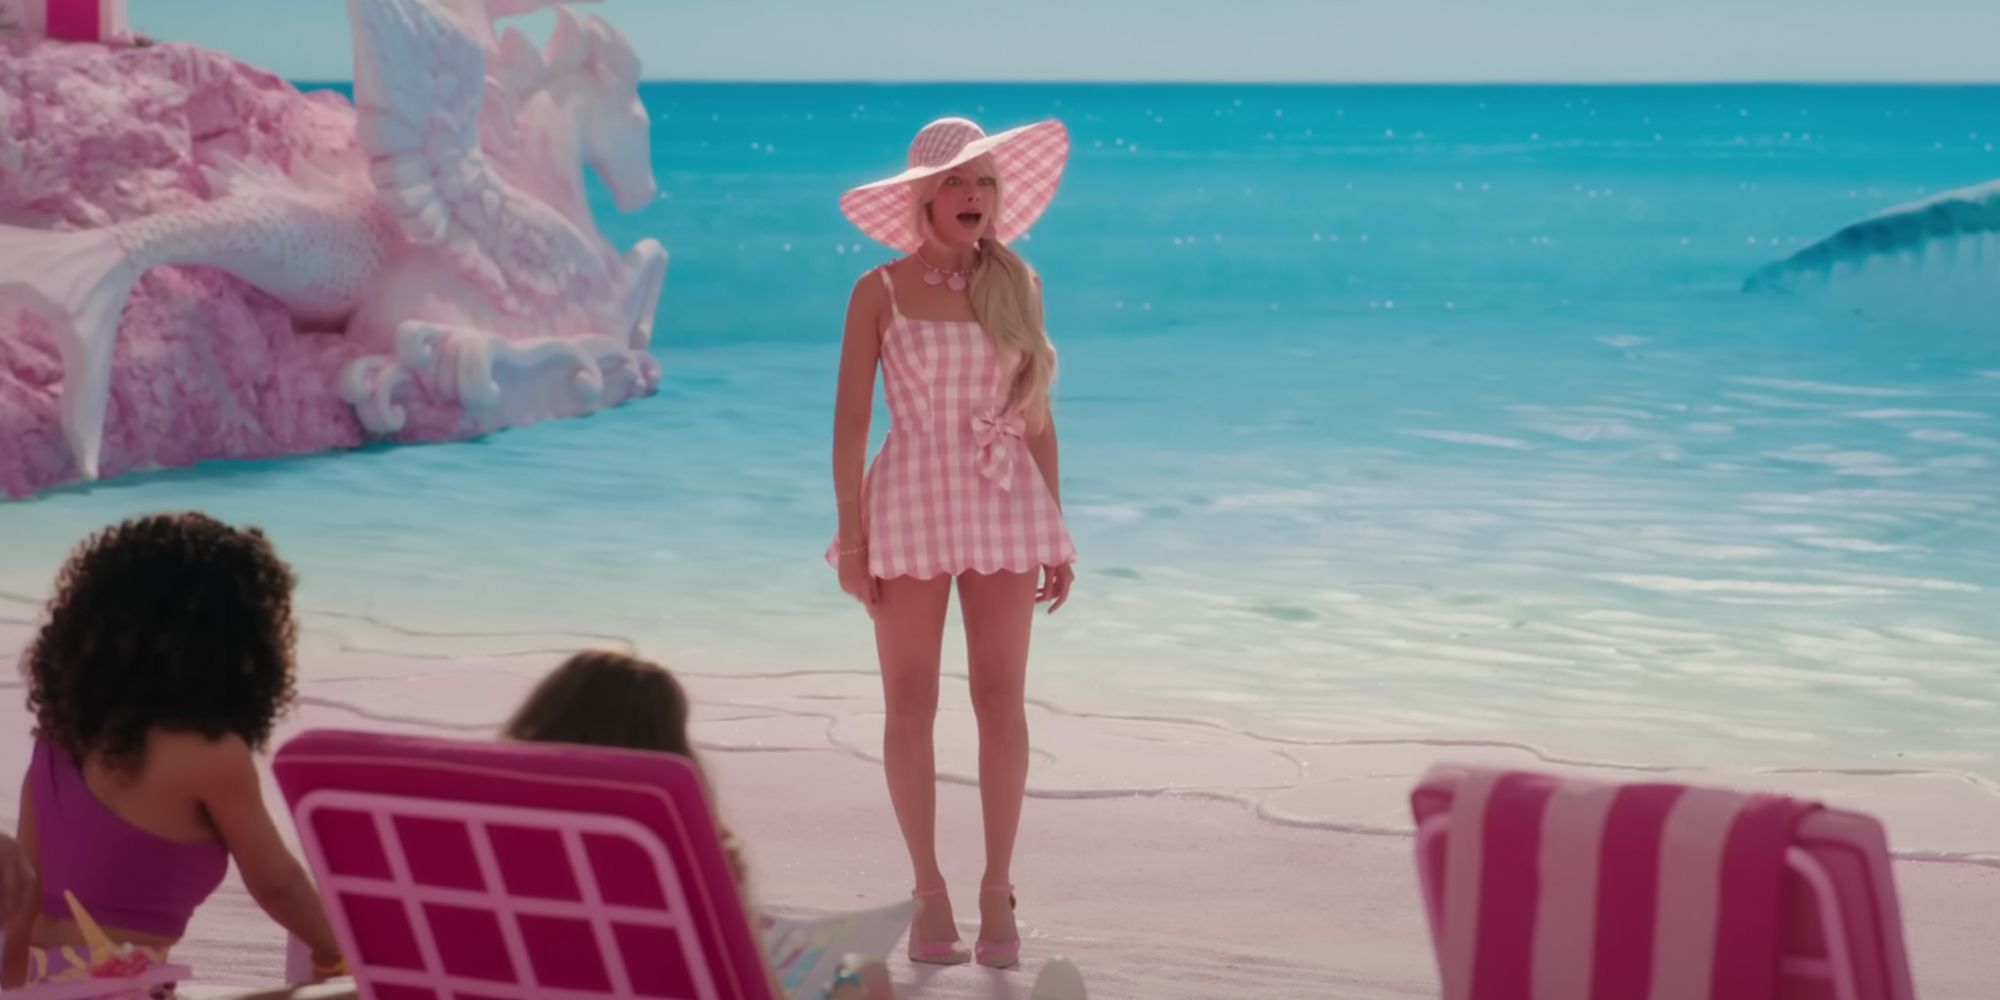 Barbie standing on the beach in a plaid dress